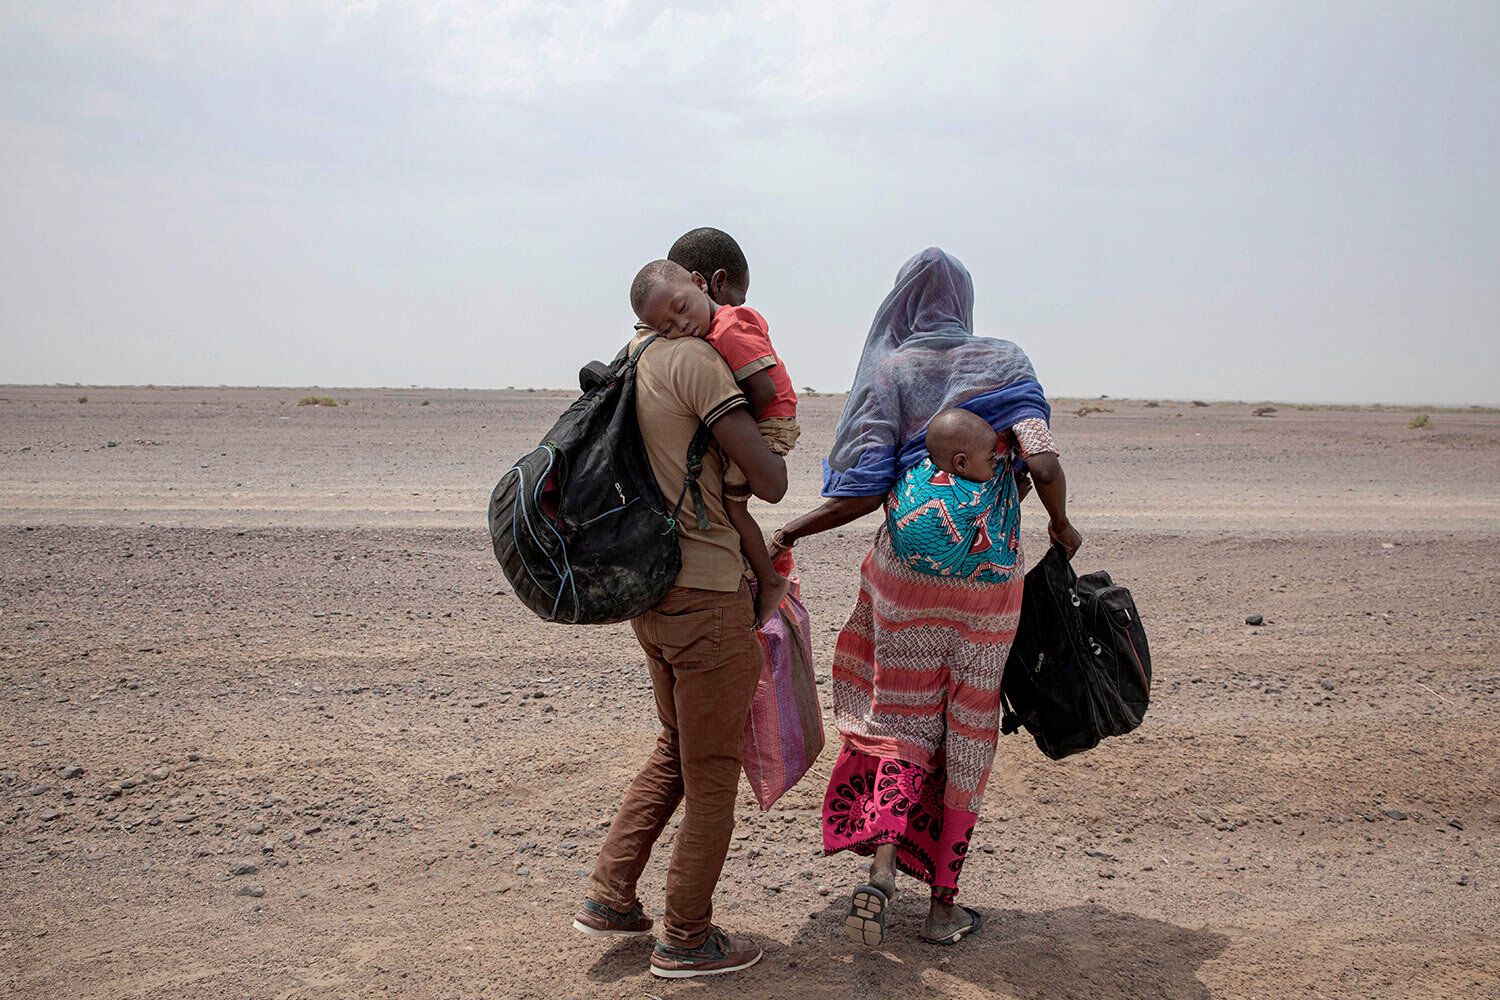 In this July 23, 2019 photo, Fatma and her husband Yacoub, migrants from Mali, carry their children as they make their way in Lahj, Yemen. Mohammed, traveled with her husband, a construction worker, and two children, through Djibouti on their way to Saudi. Once they reached the shore, they were held for several days by traffickers. Image by Nariman El-Mofty / AP Photo. Yemen, 2019.